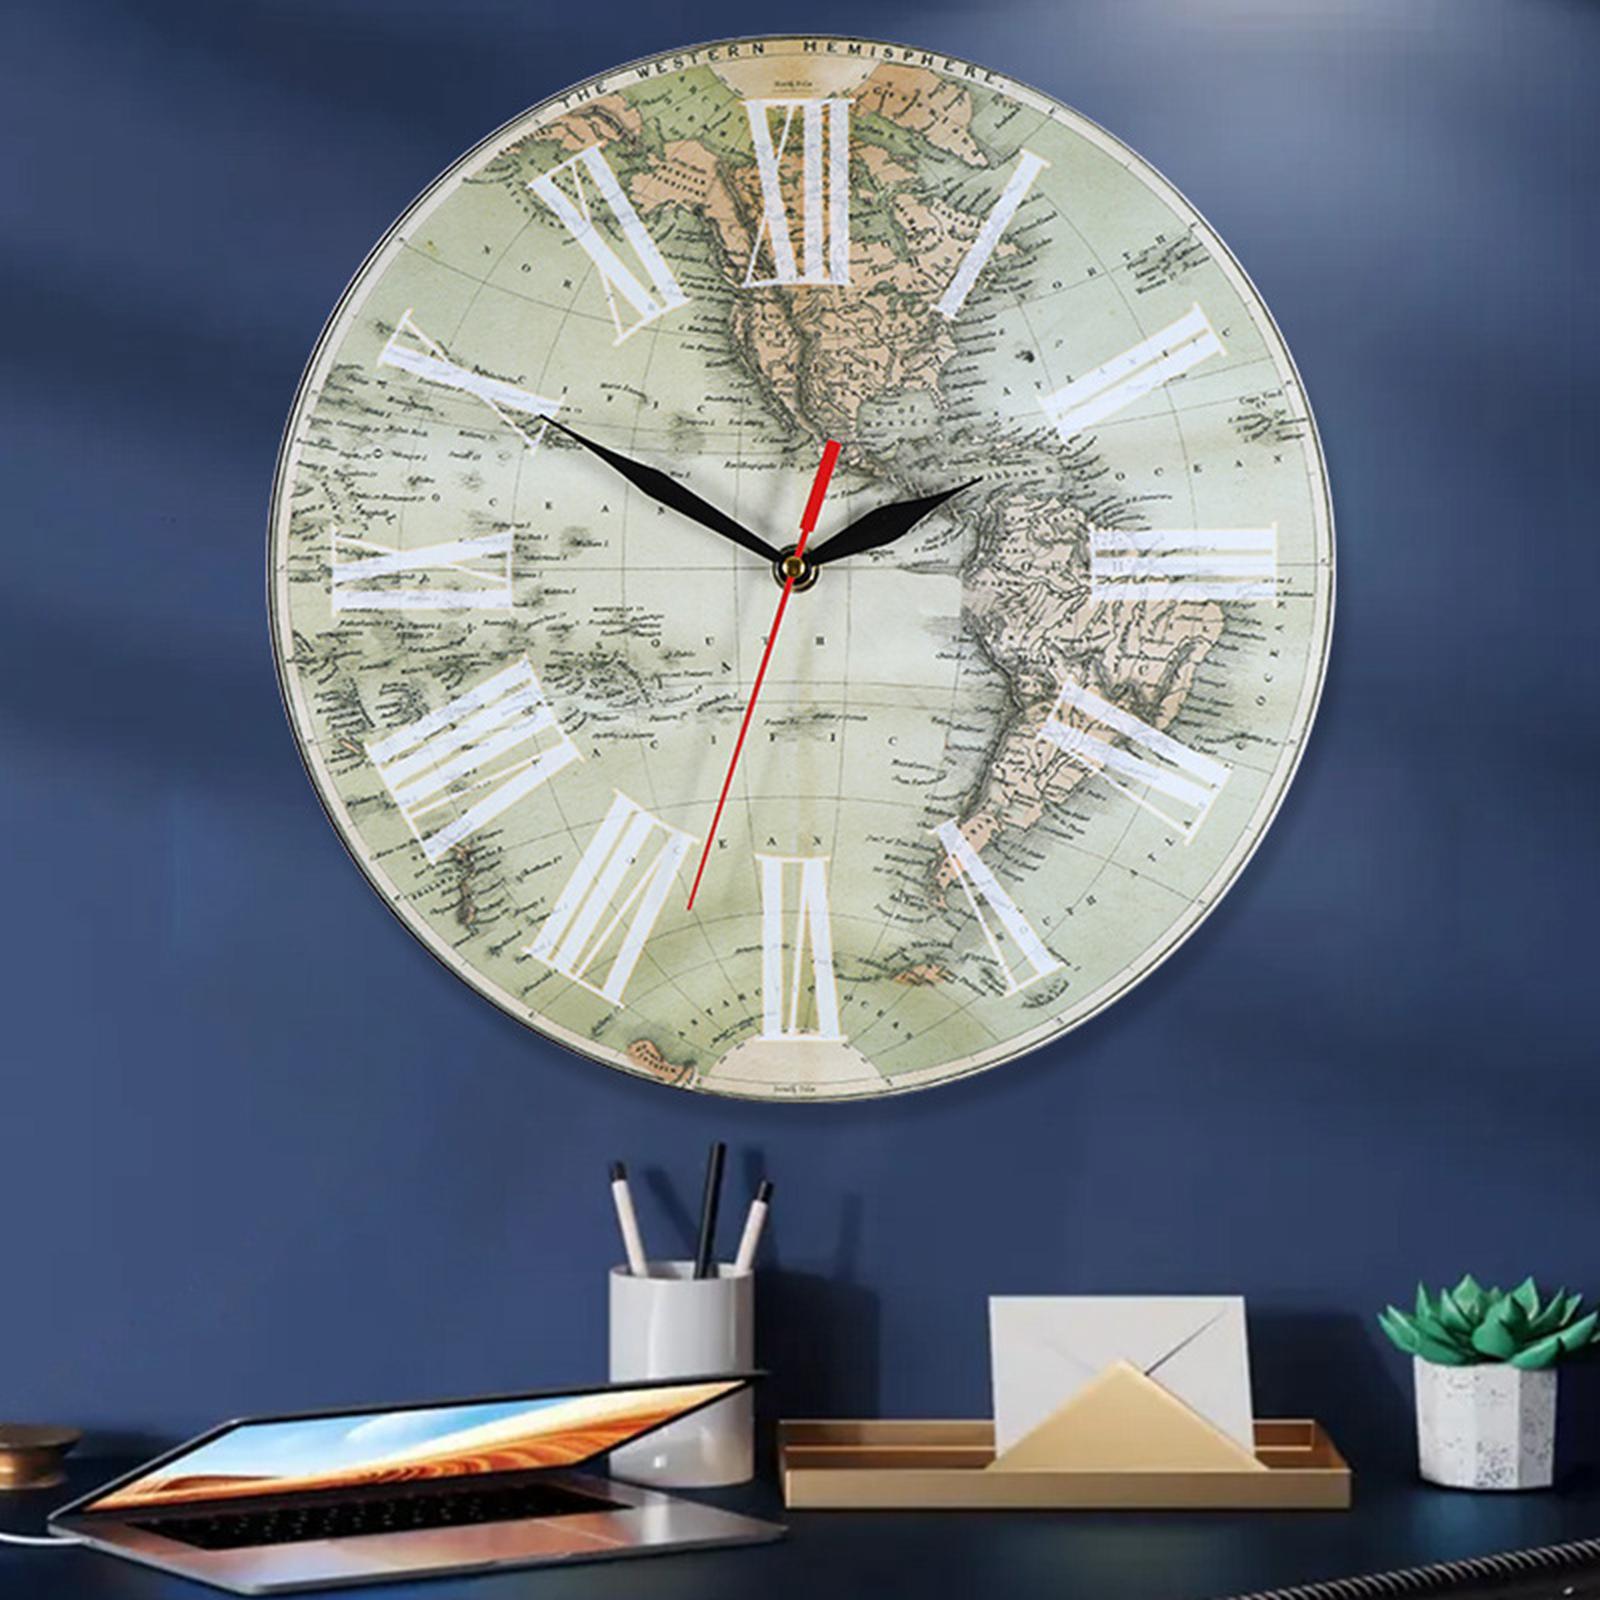 Old World Map Round Wall Clock Silent Non Ticking Battery Operated